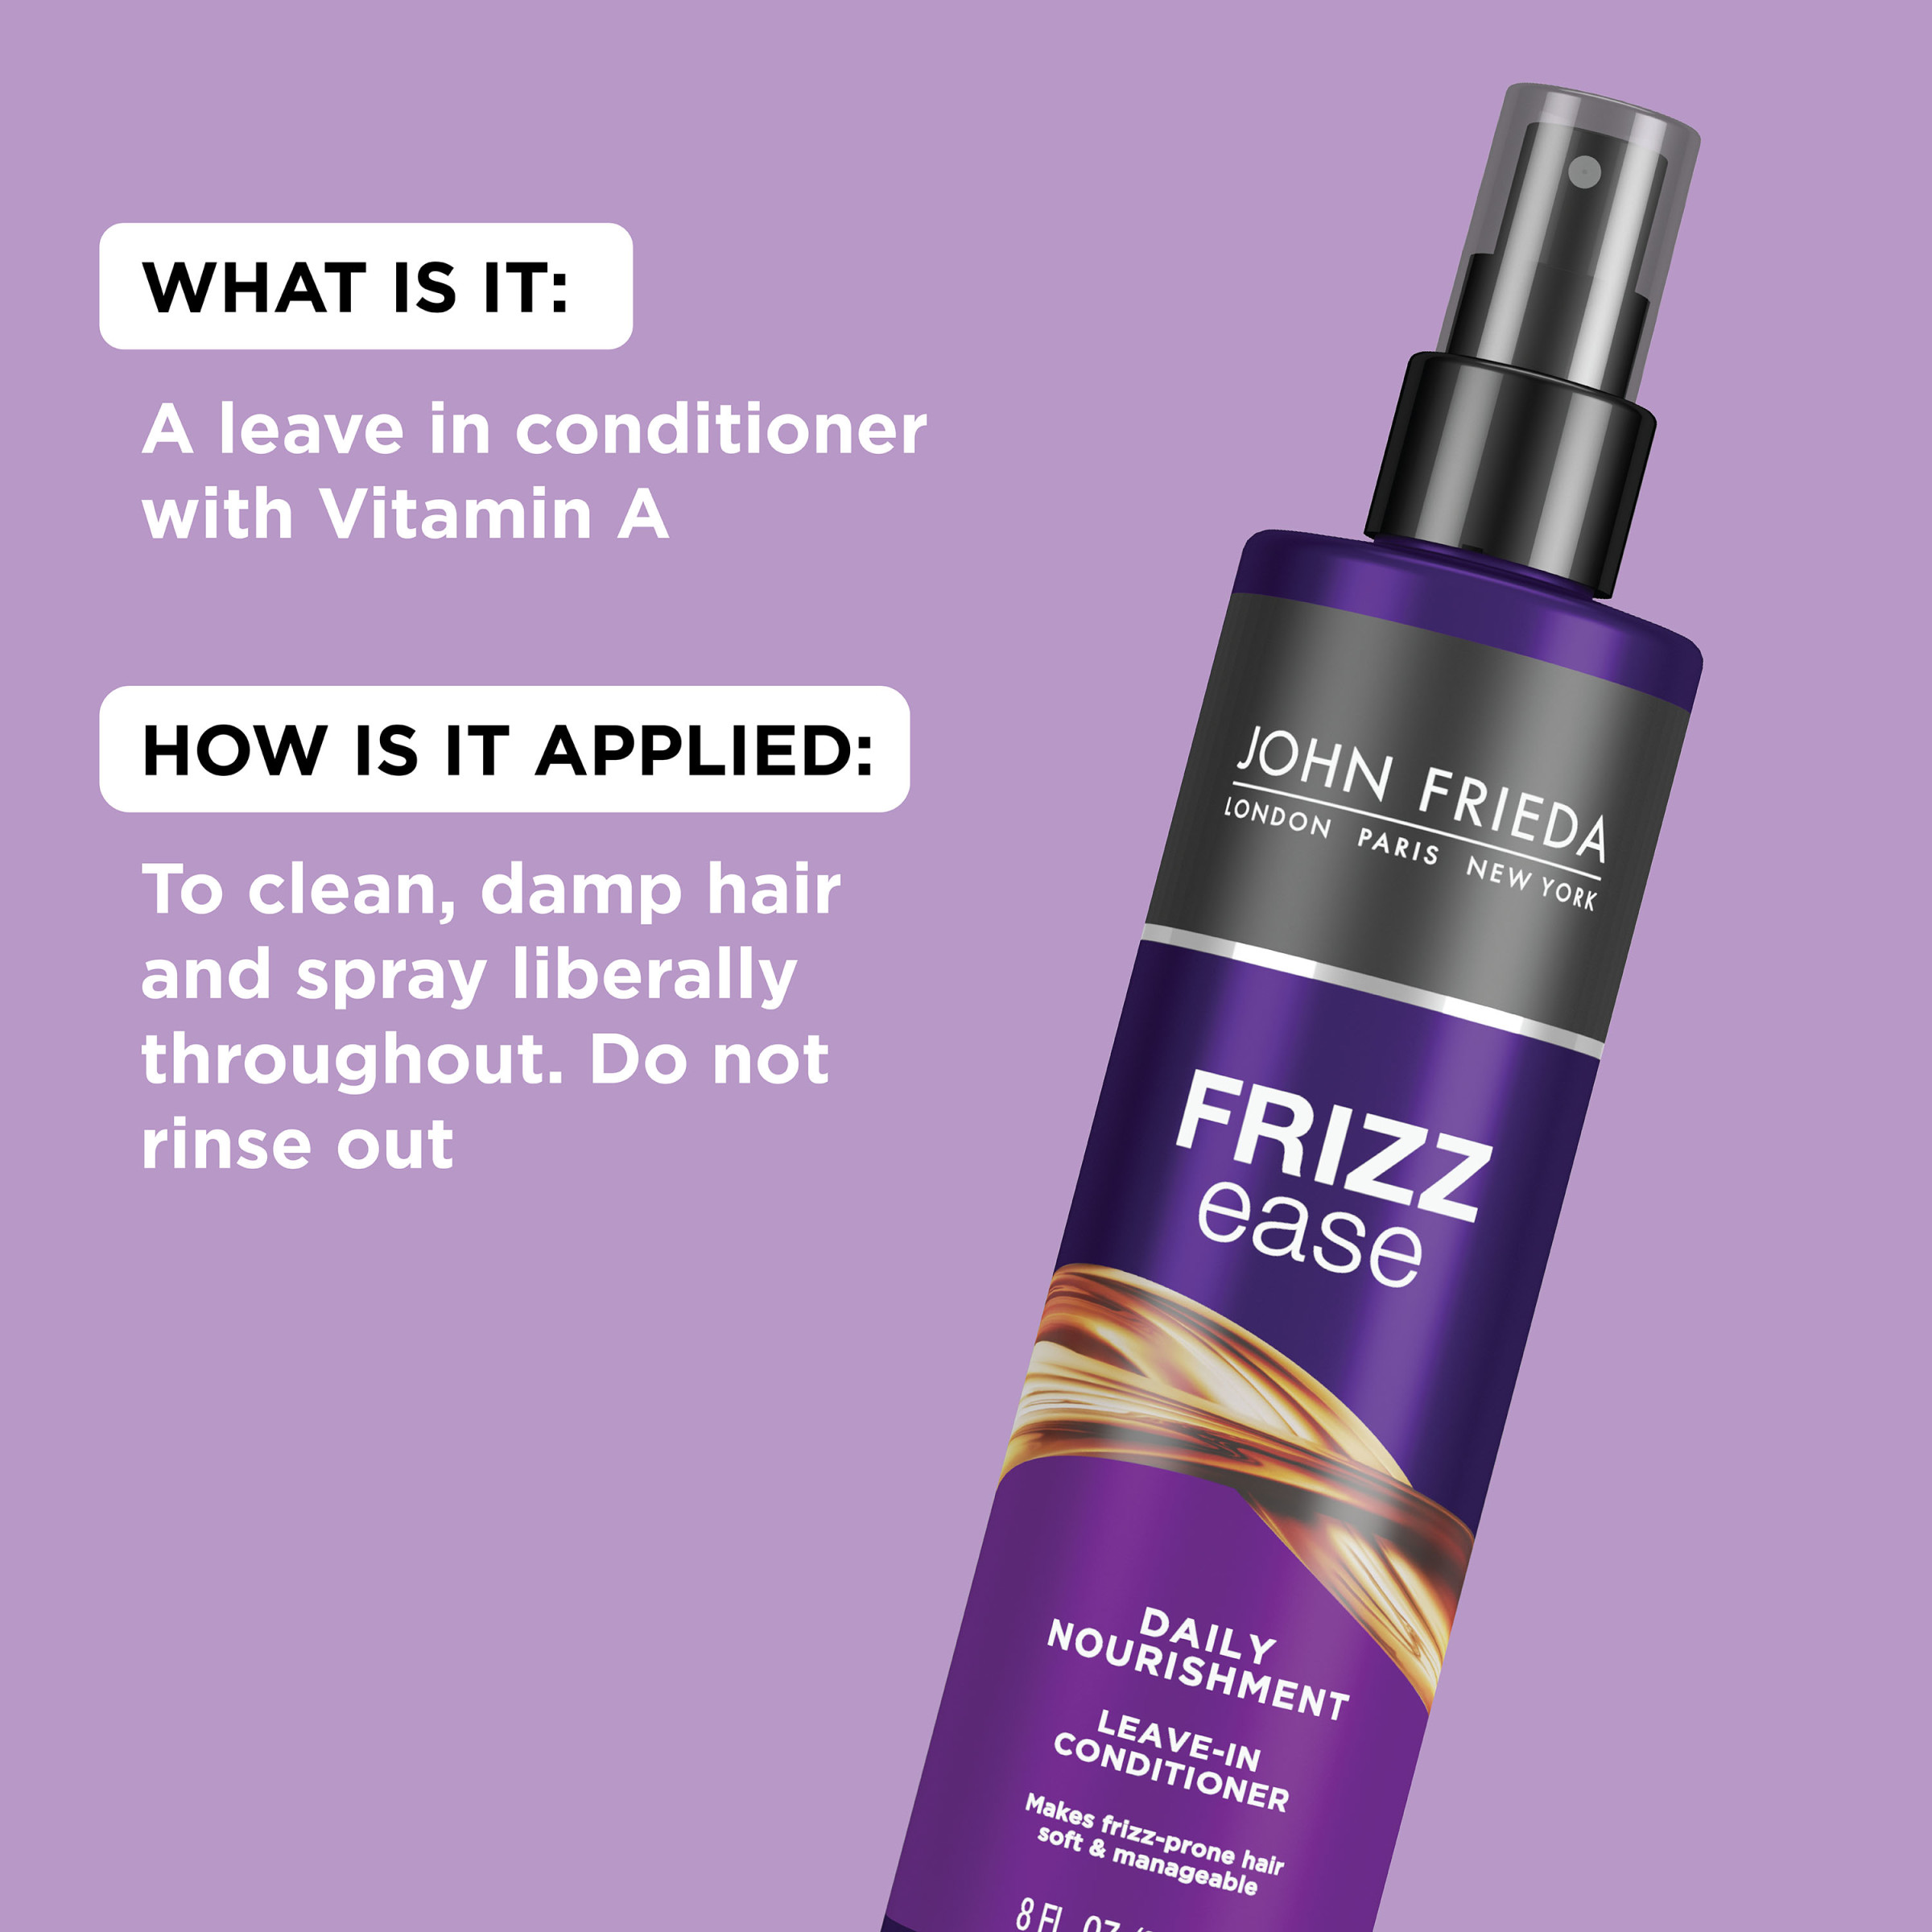 John Frieda Anti Frizz, Frizz Ease Daily Nourishment Leave In Conditioner for Frizzy, Dry Hair, 8 fl oz - image 4 of 10